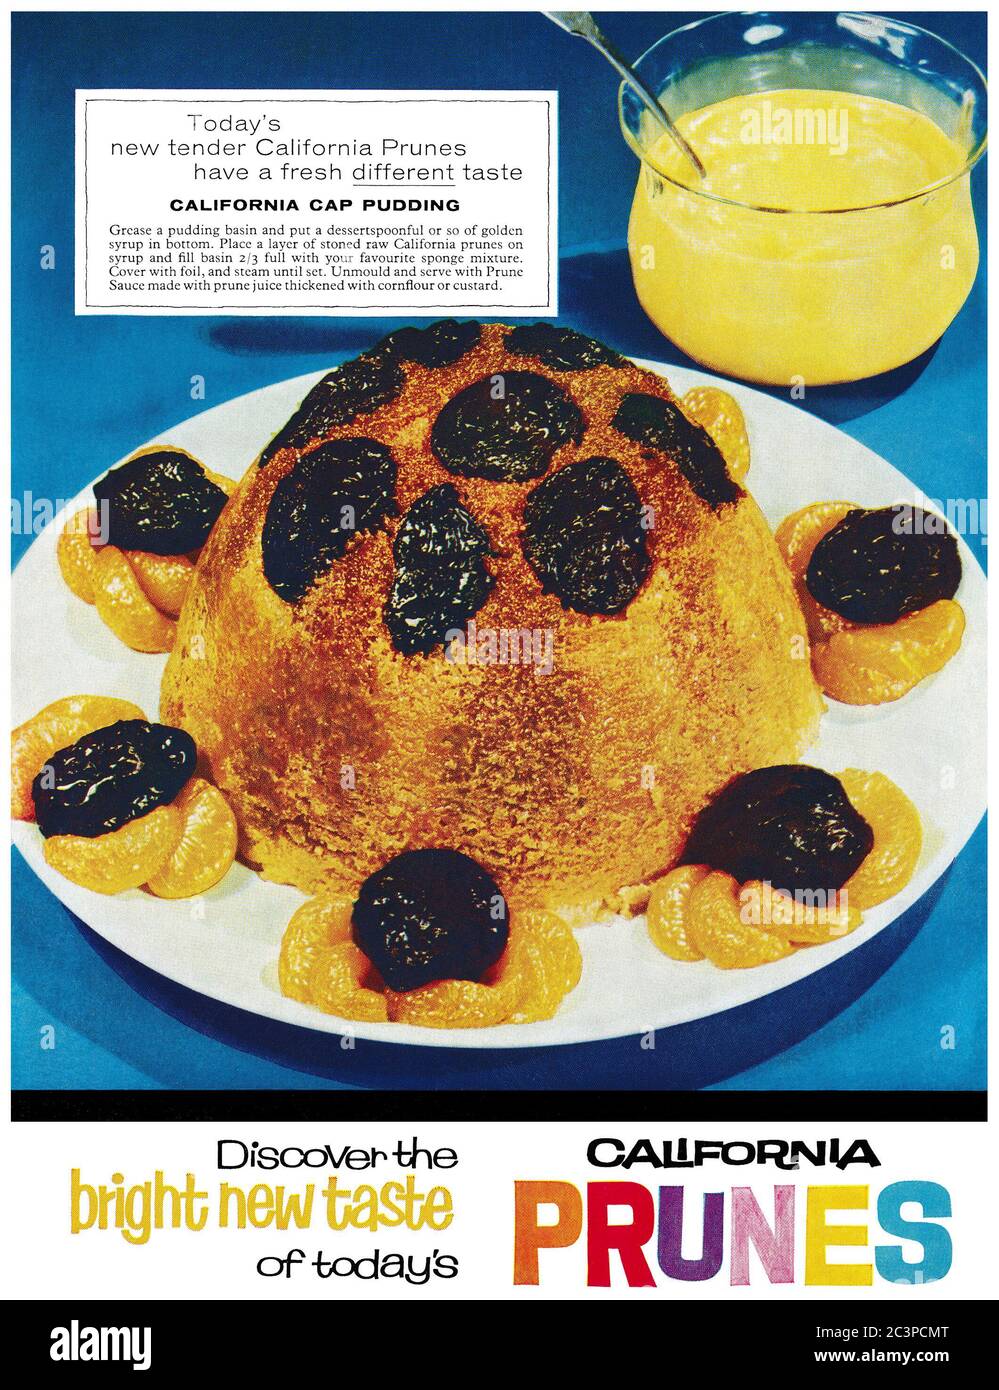 1964 British advertisement for California prunes with a recipe for California cap pudding. Stock Photo